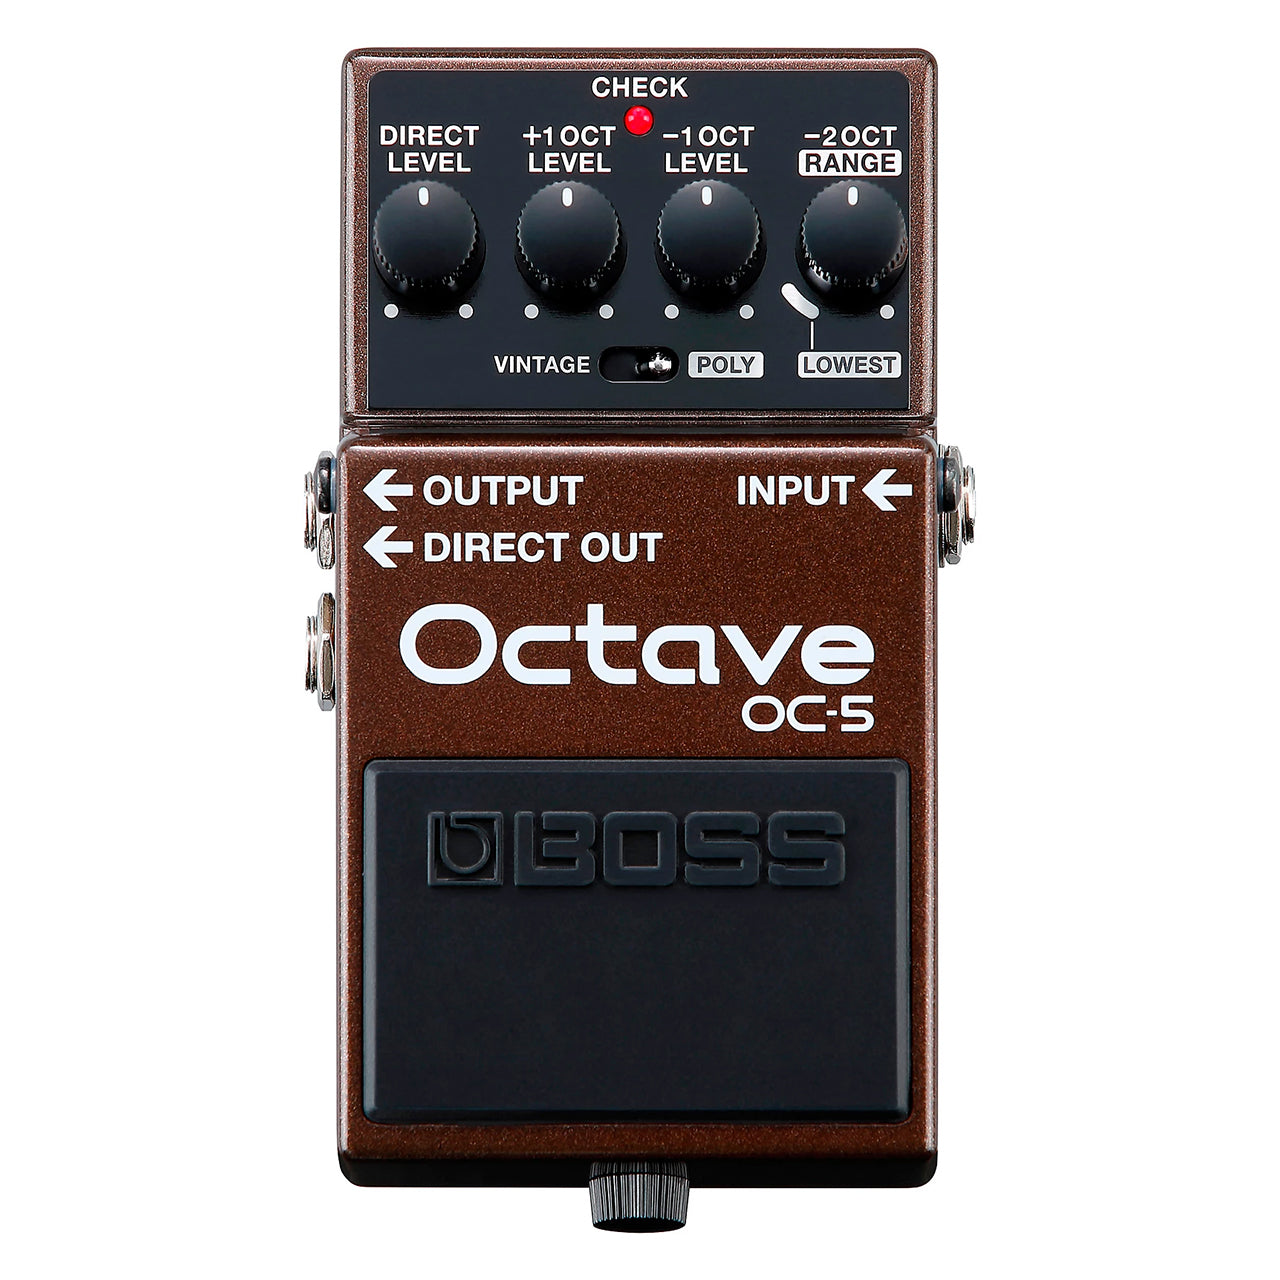 BOSS OC-5 Octave Effects Pedal